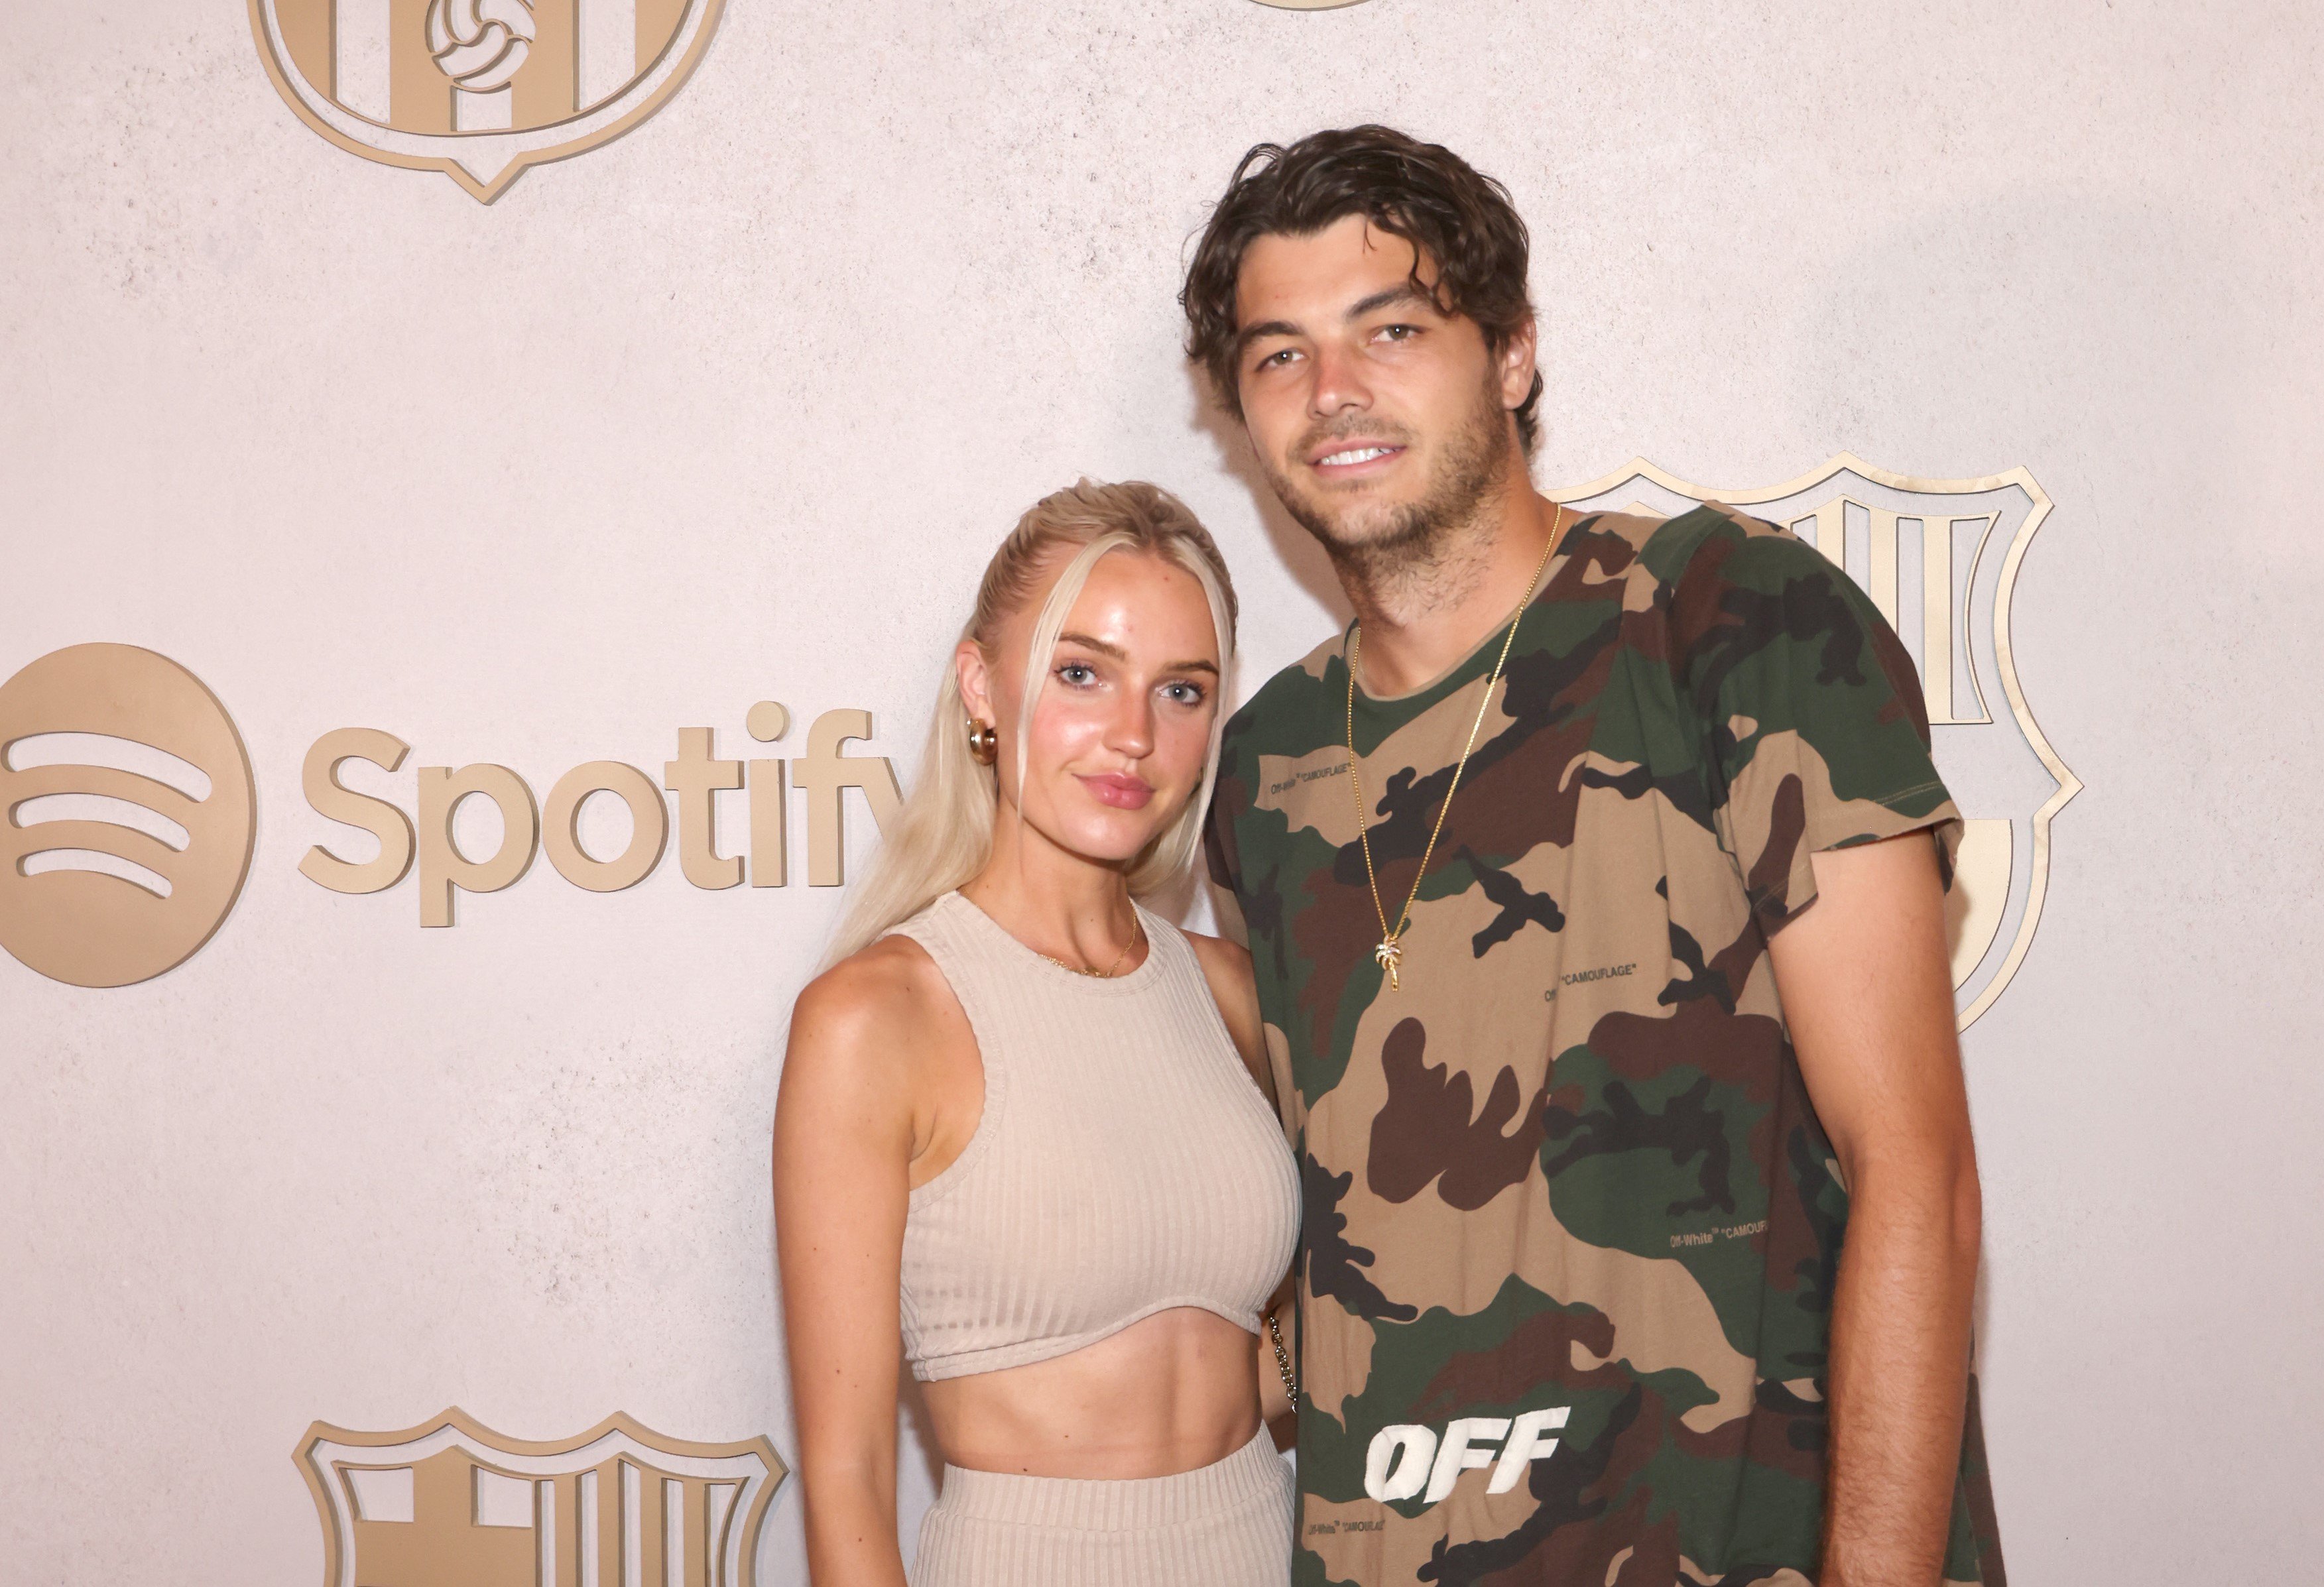 Taylor Fritz and girlfriend Morgan Riddle attend event together in Miami